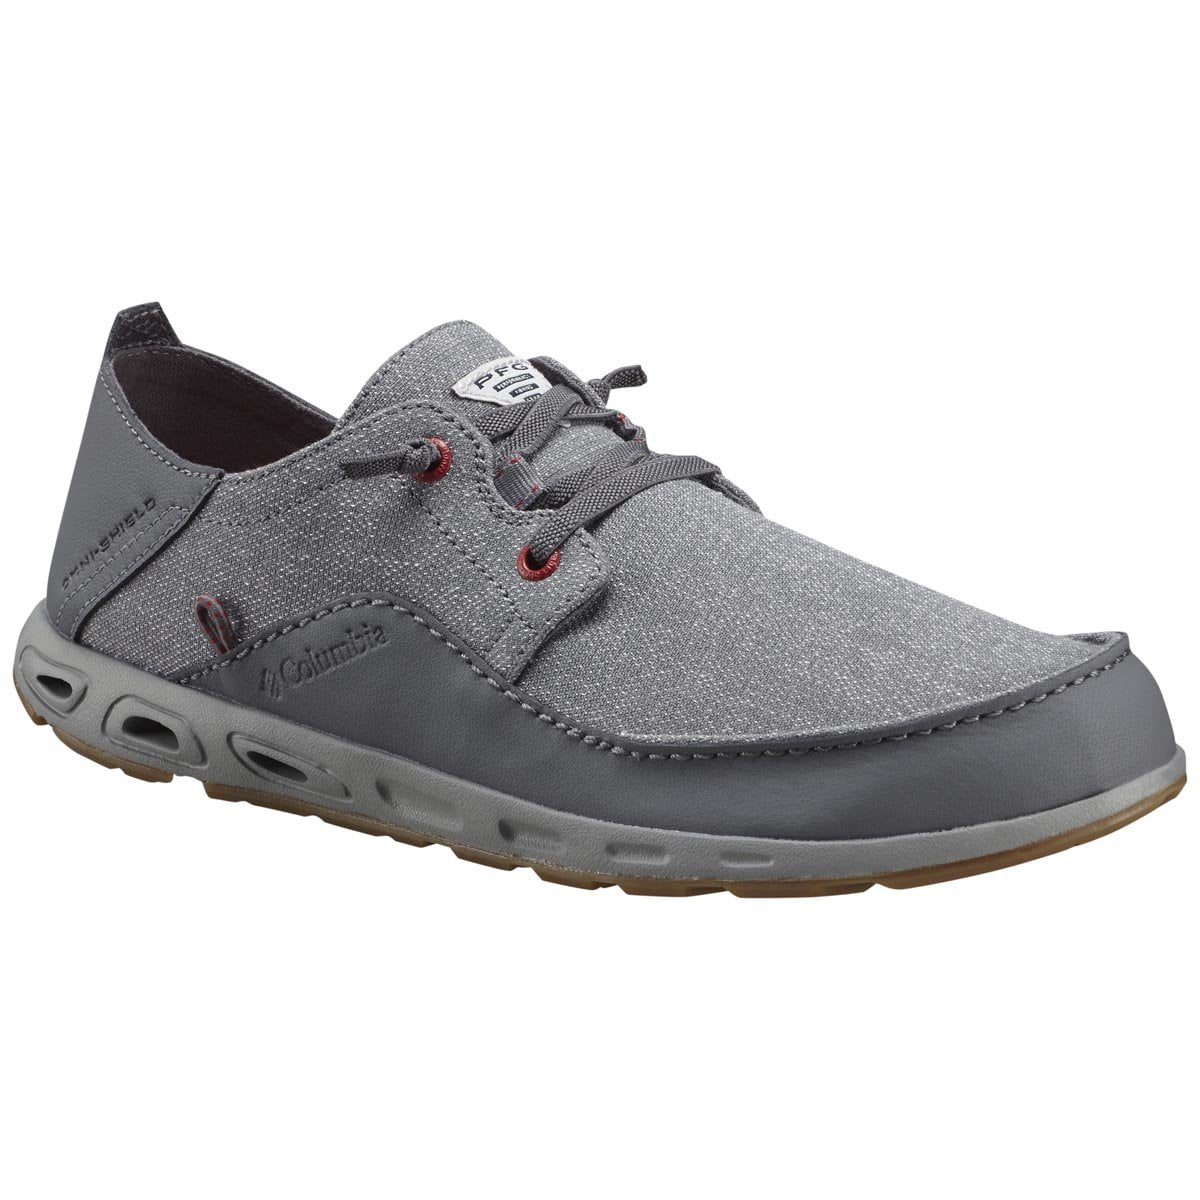 columbia sportswear men's bahama vent relaxed pfg boat shoes